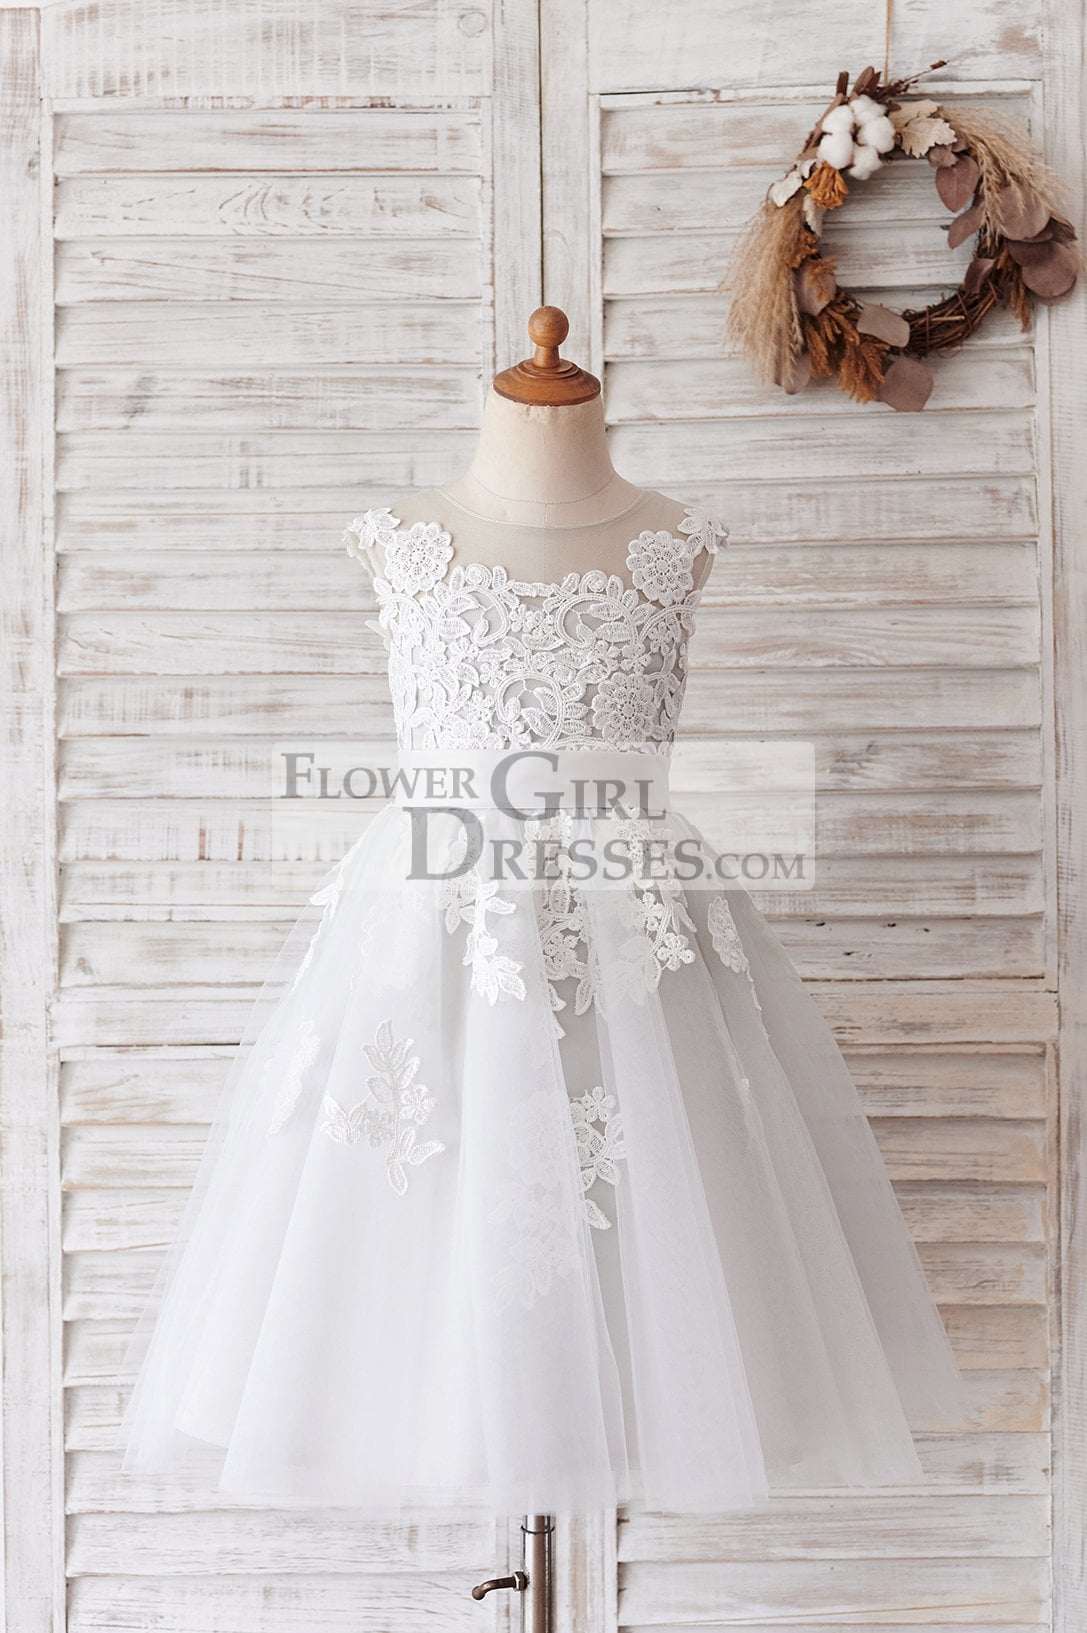 Ivory Lace Mauve/Silver Gray Tulle Wedding Flower Girl Dress - 1T / Gray